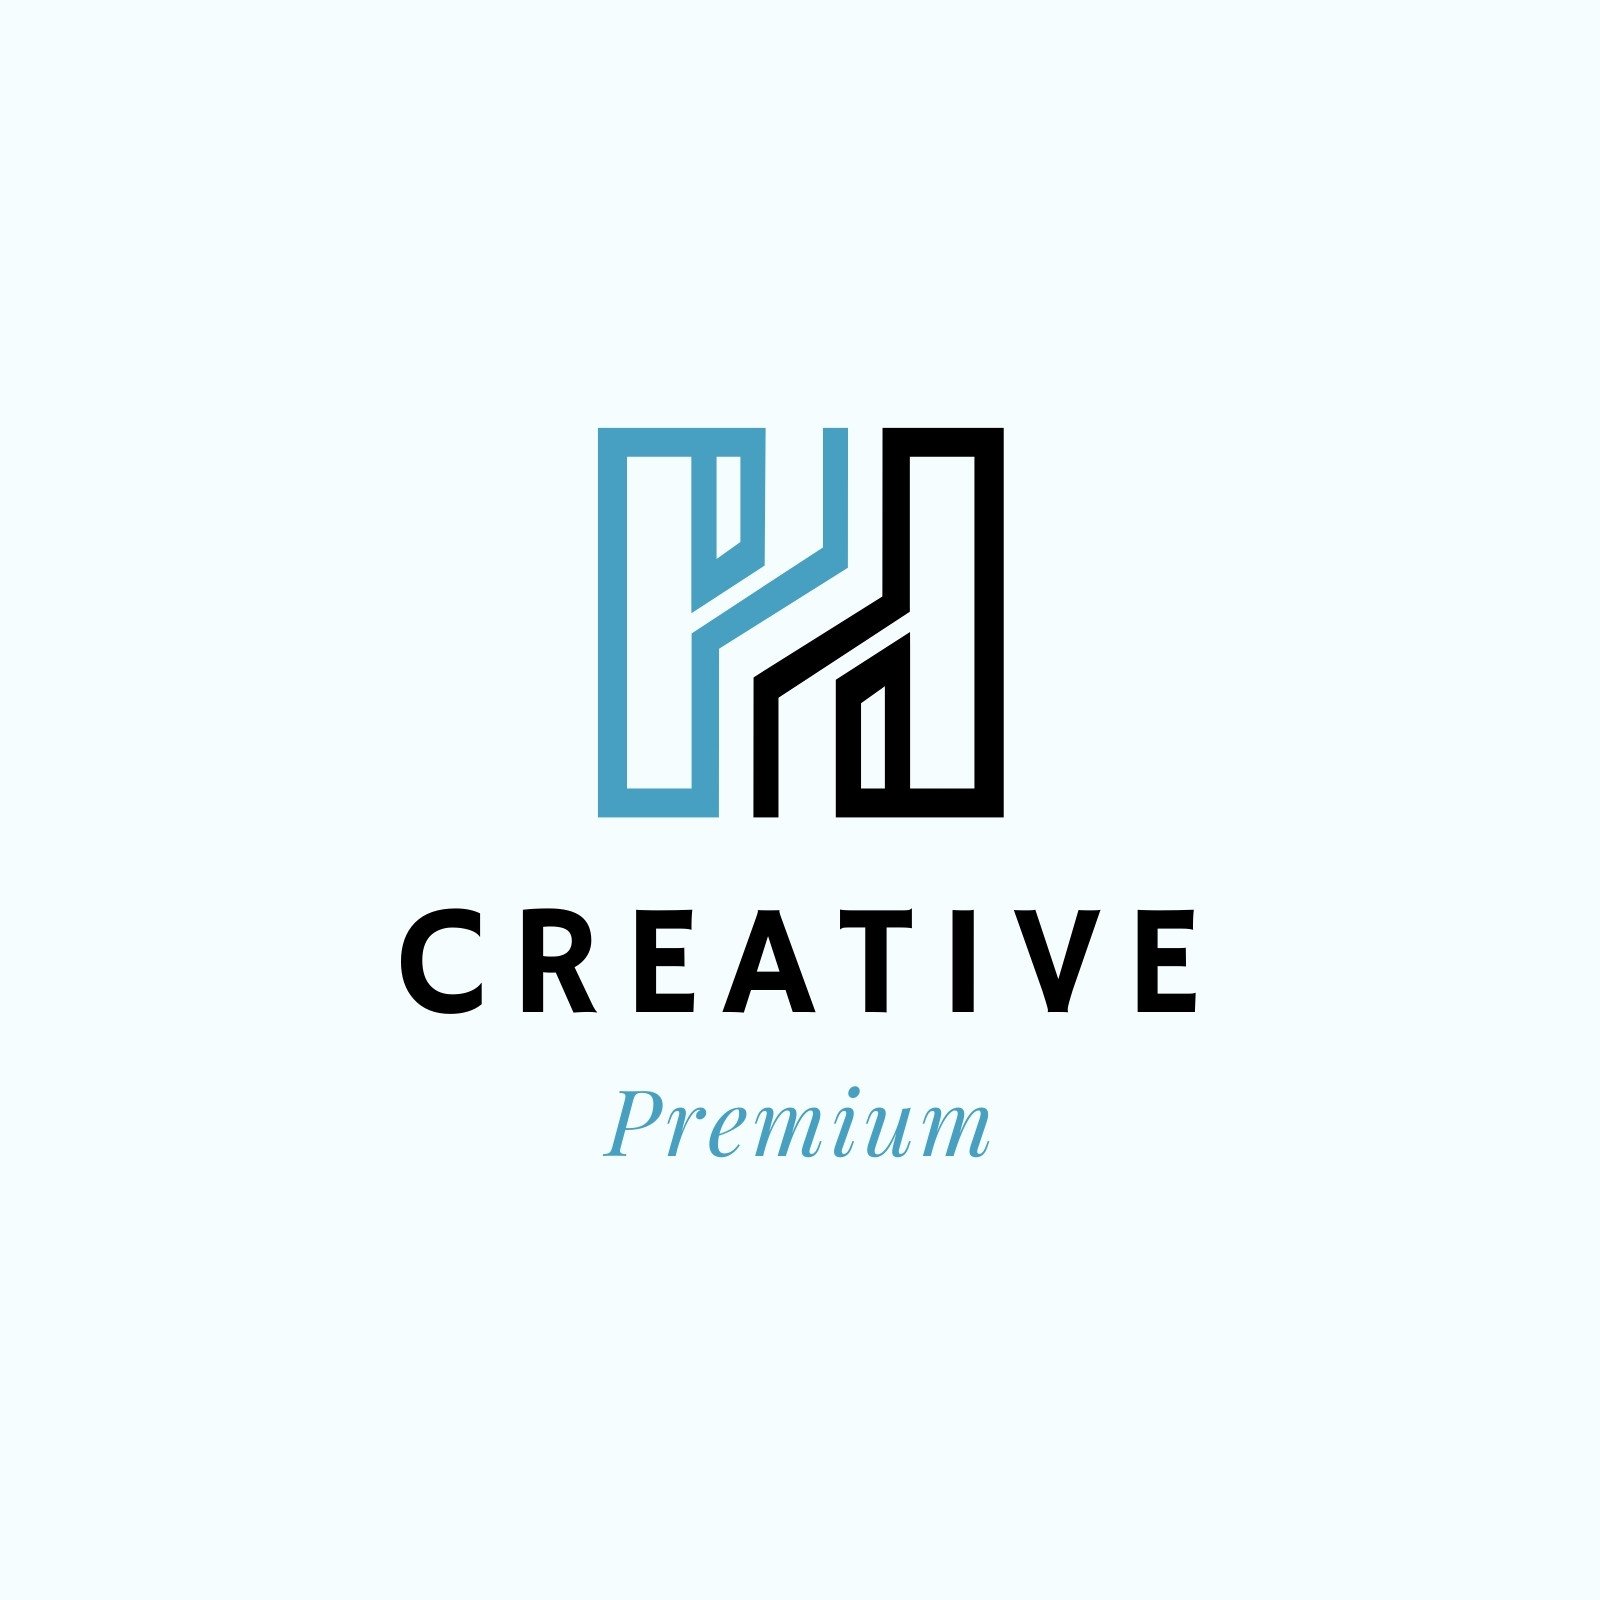 Letter FX logo design with creativity and professionality